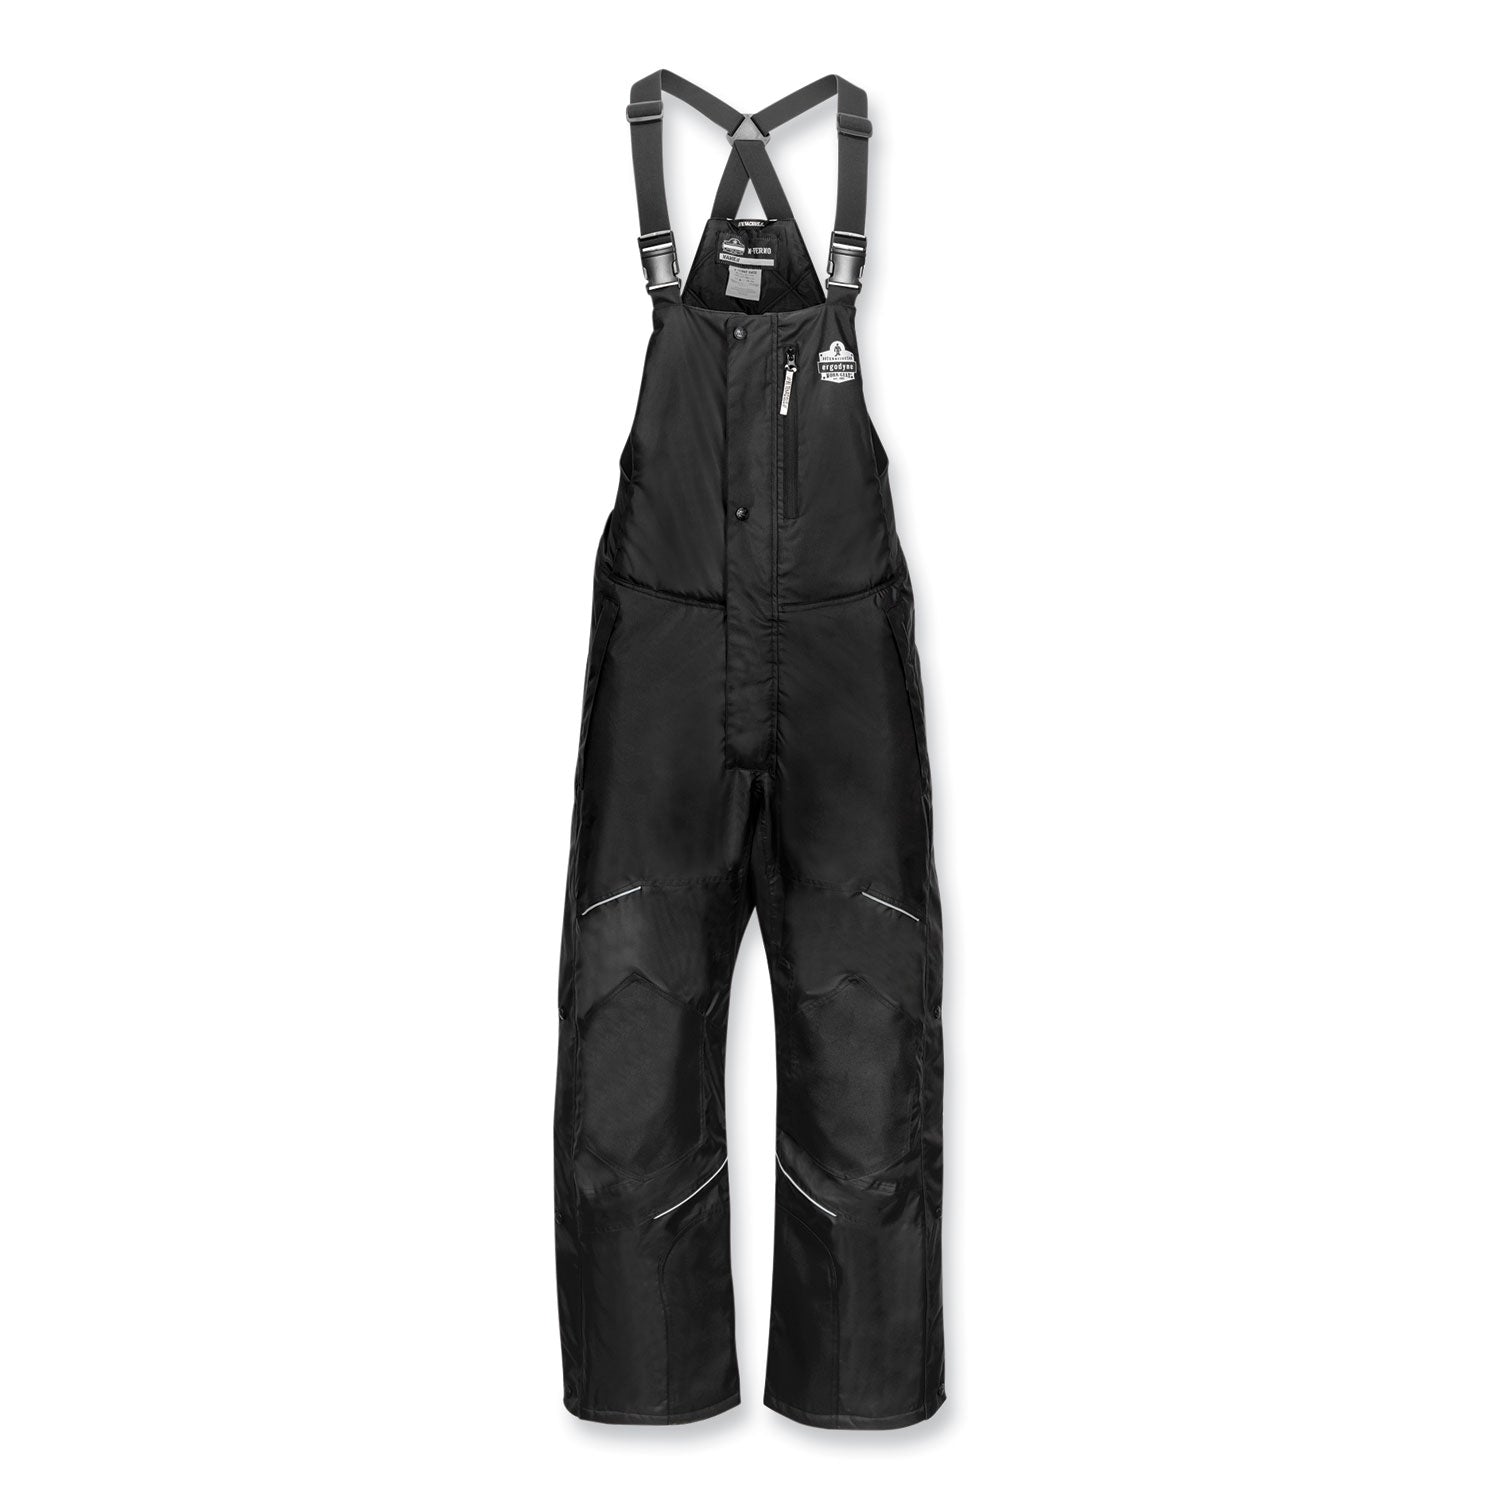 n-ferno-6472-thermal-bib-with-300d-oxford-shell-x-large-black-ships-in-1-3-business-days_ego41225 - 1